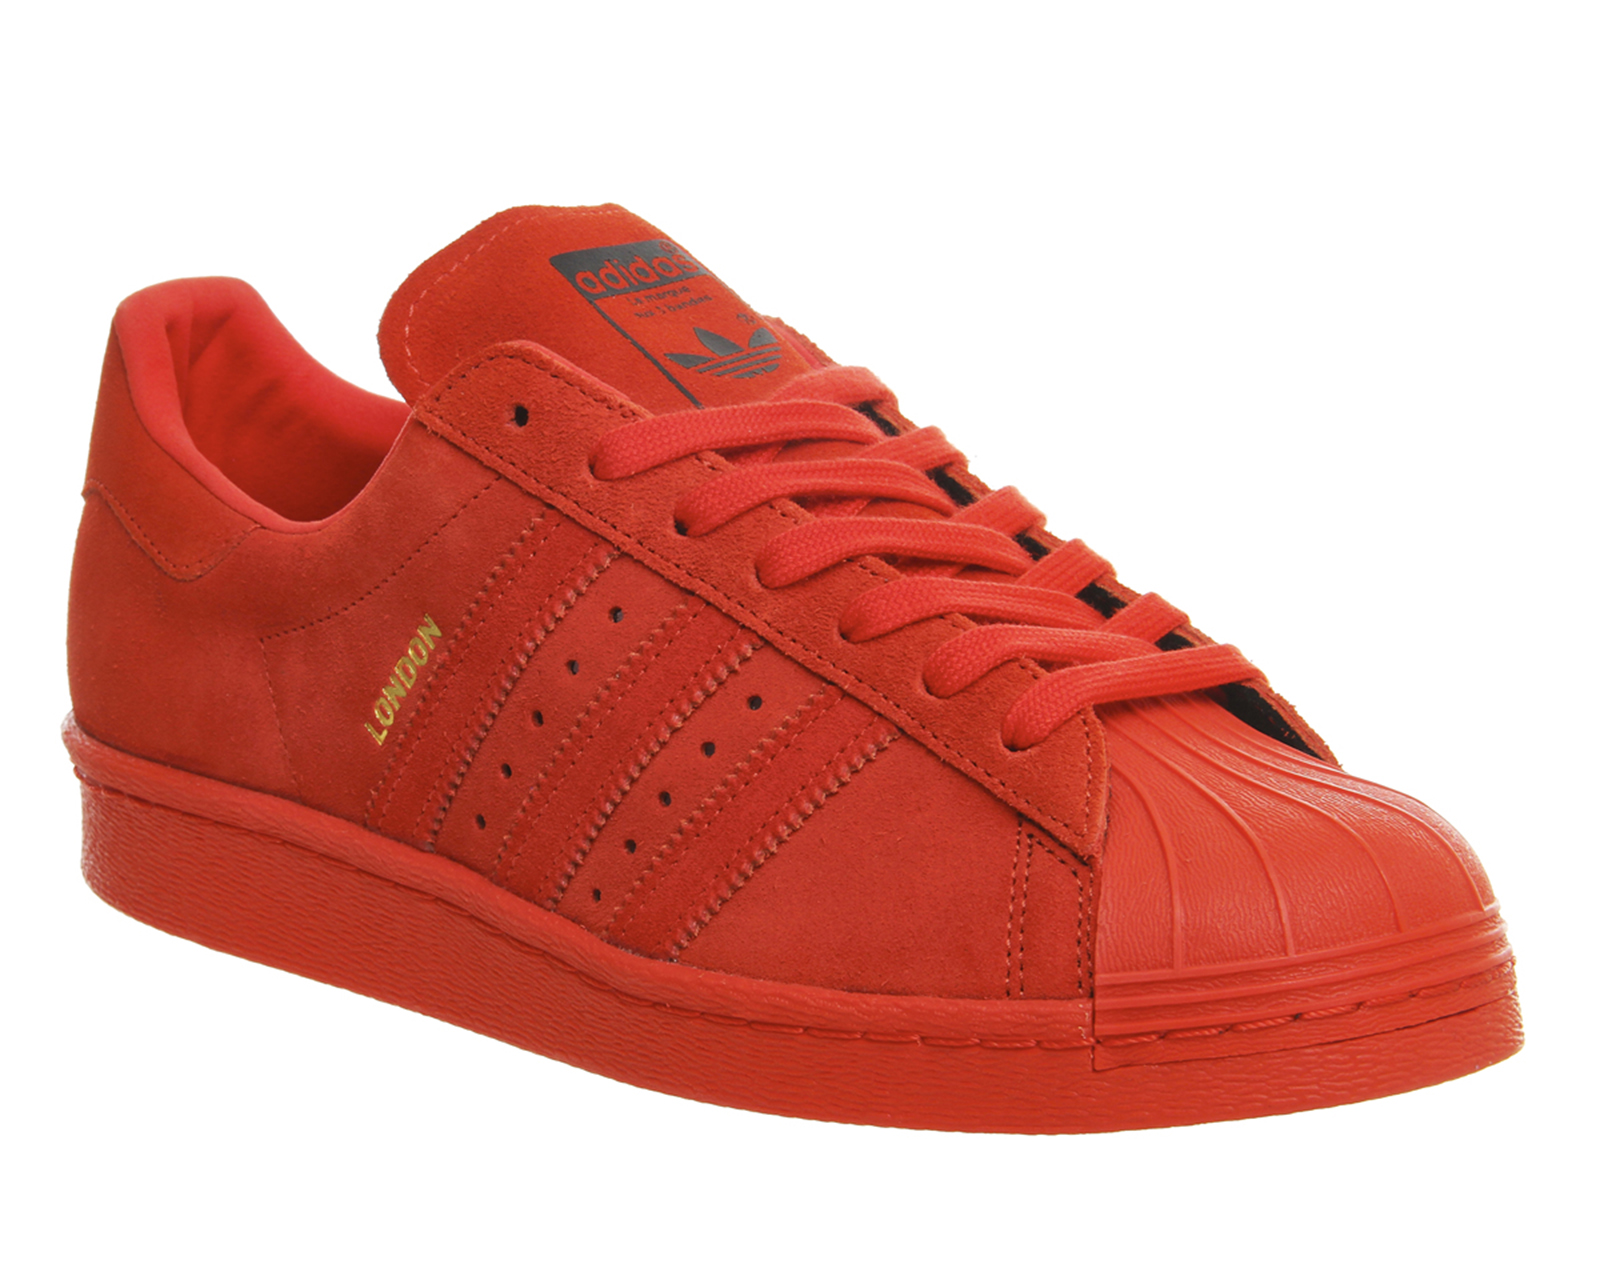 adidas Superstar 80s City Pack Red 